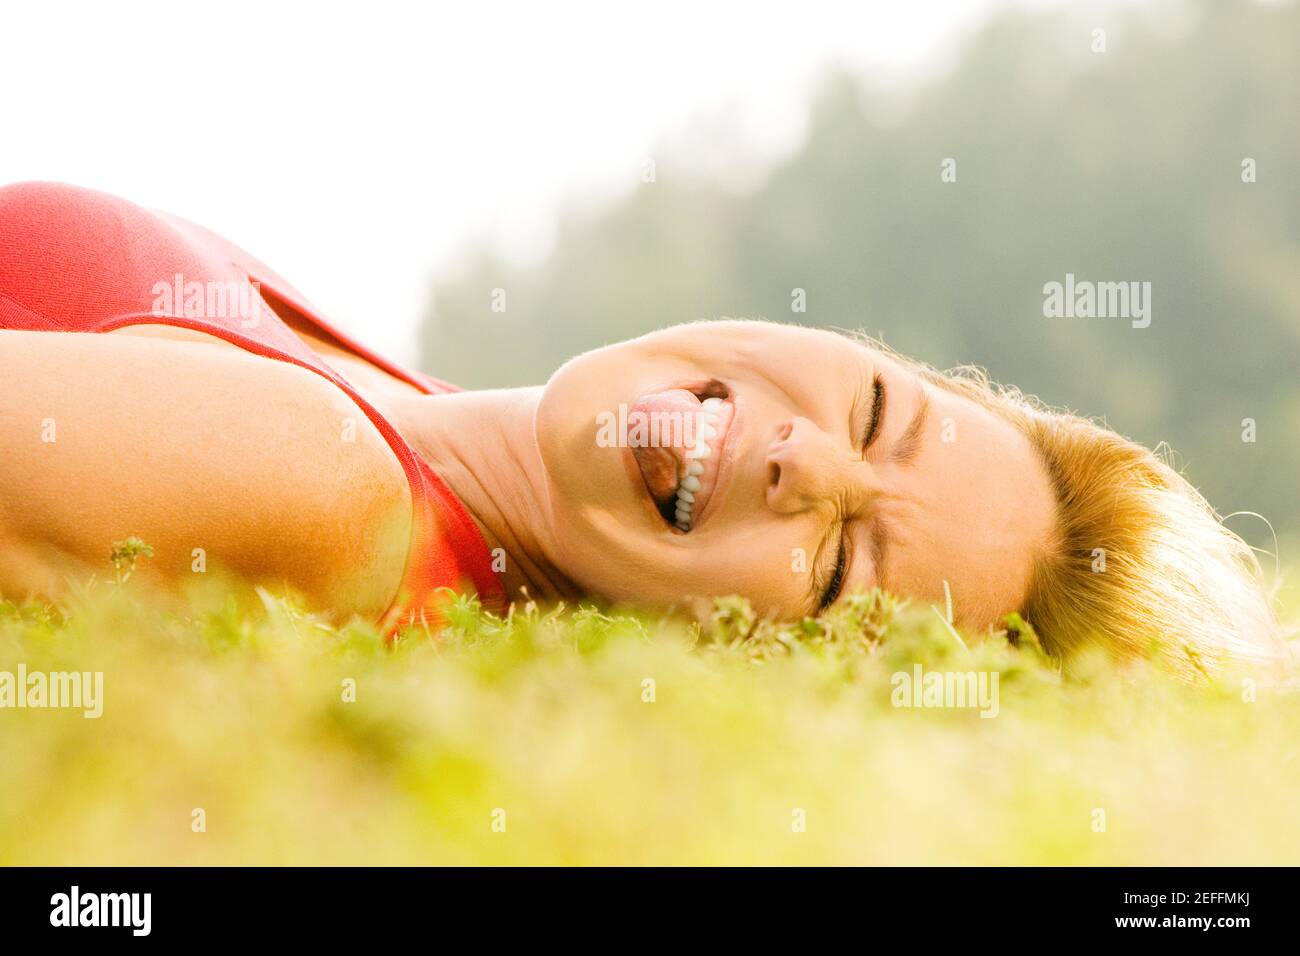 Portrait of a mid adult woman lying on the grass Stock Photo